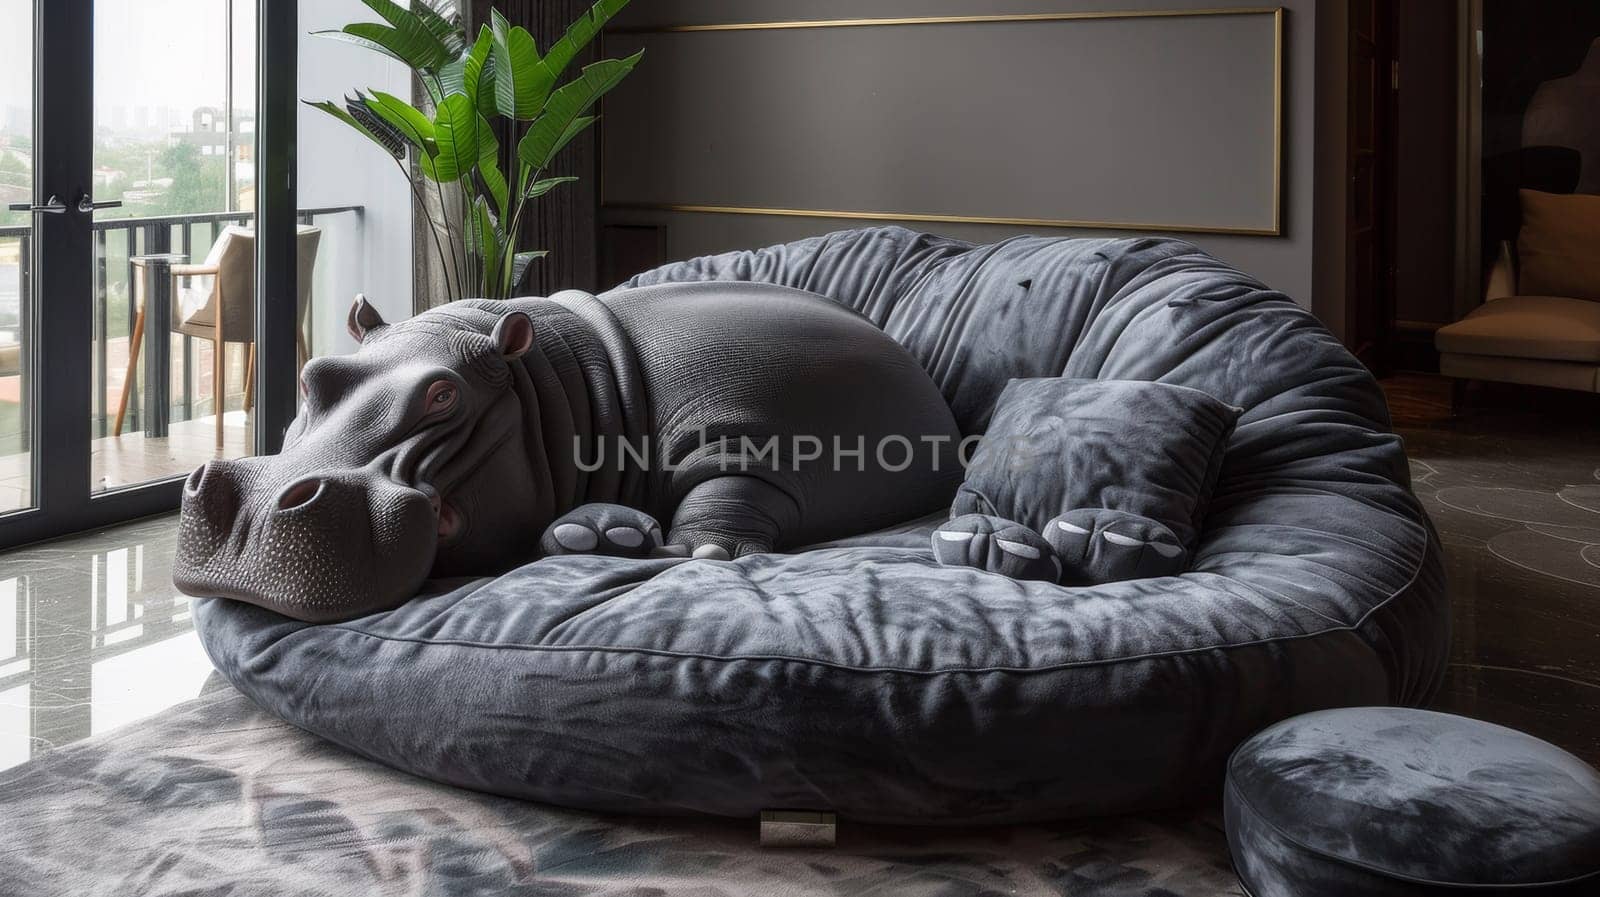 A hippo shaped bean bag chair sitting in front of a window